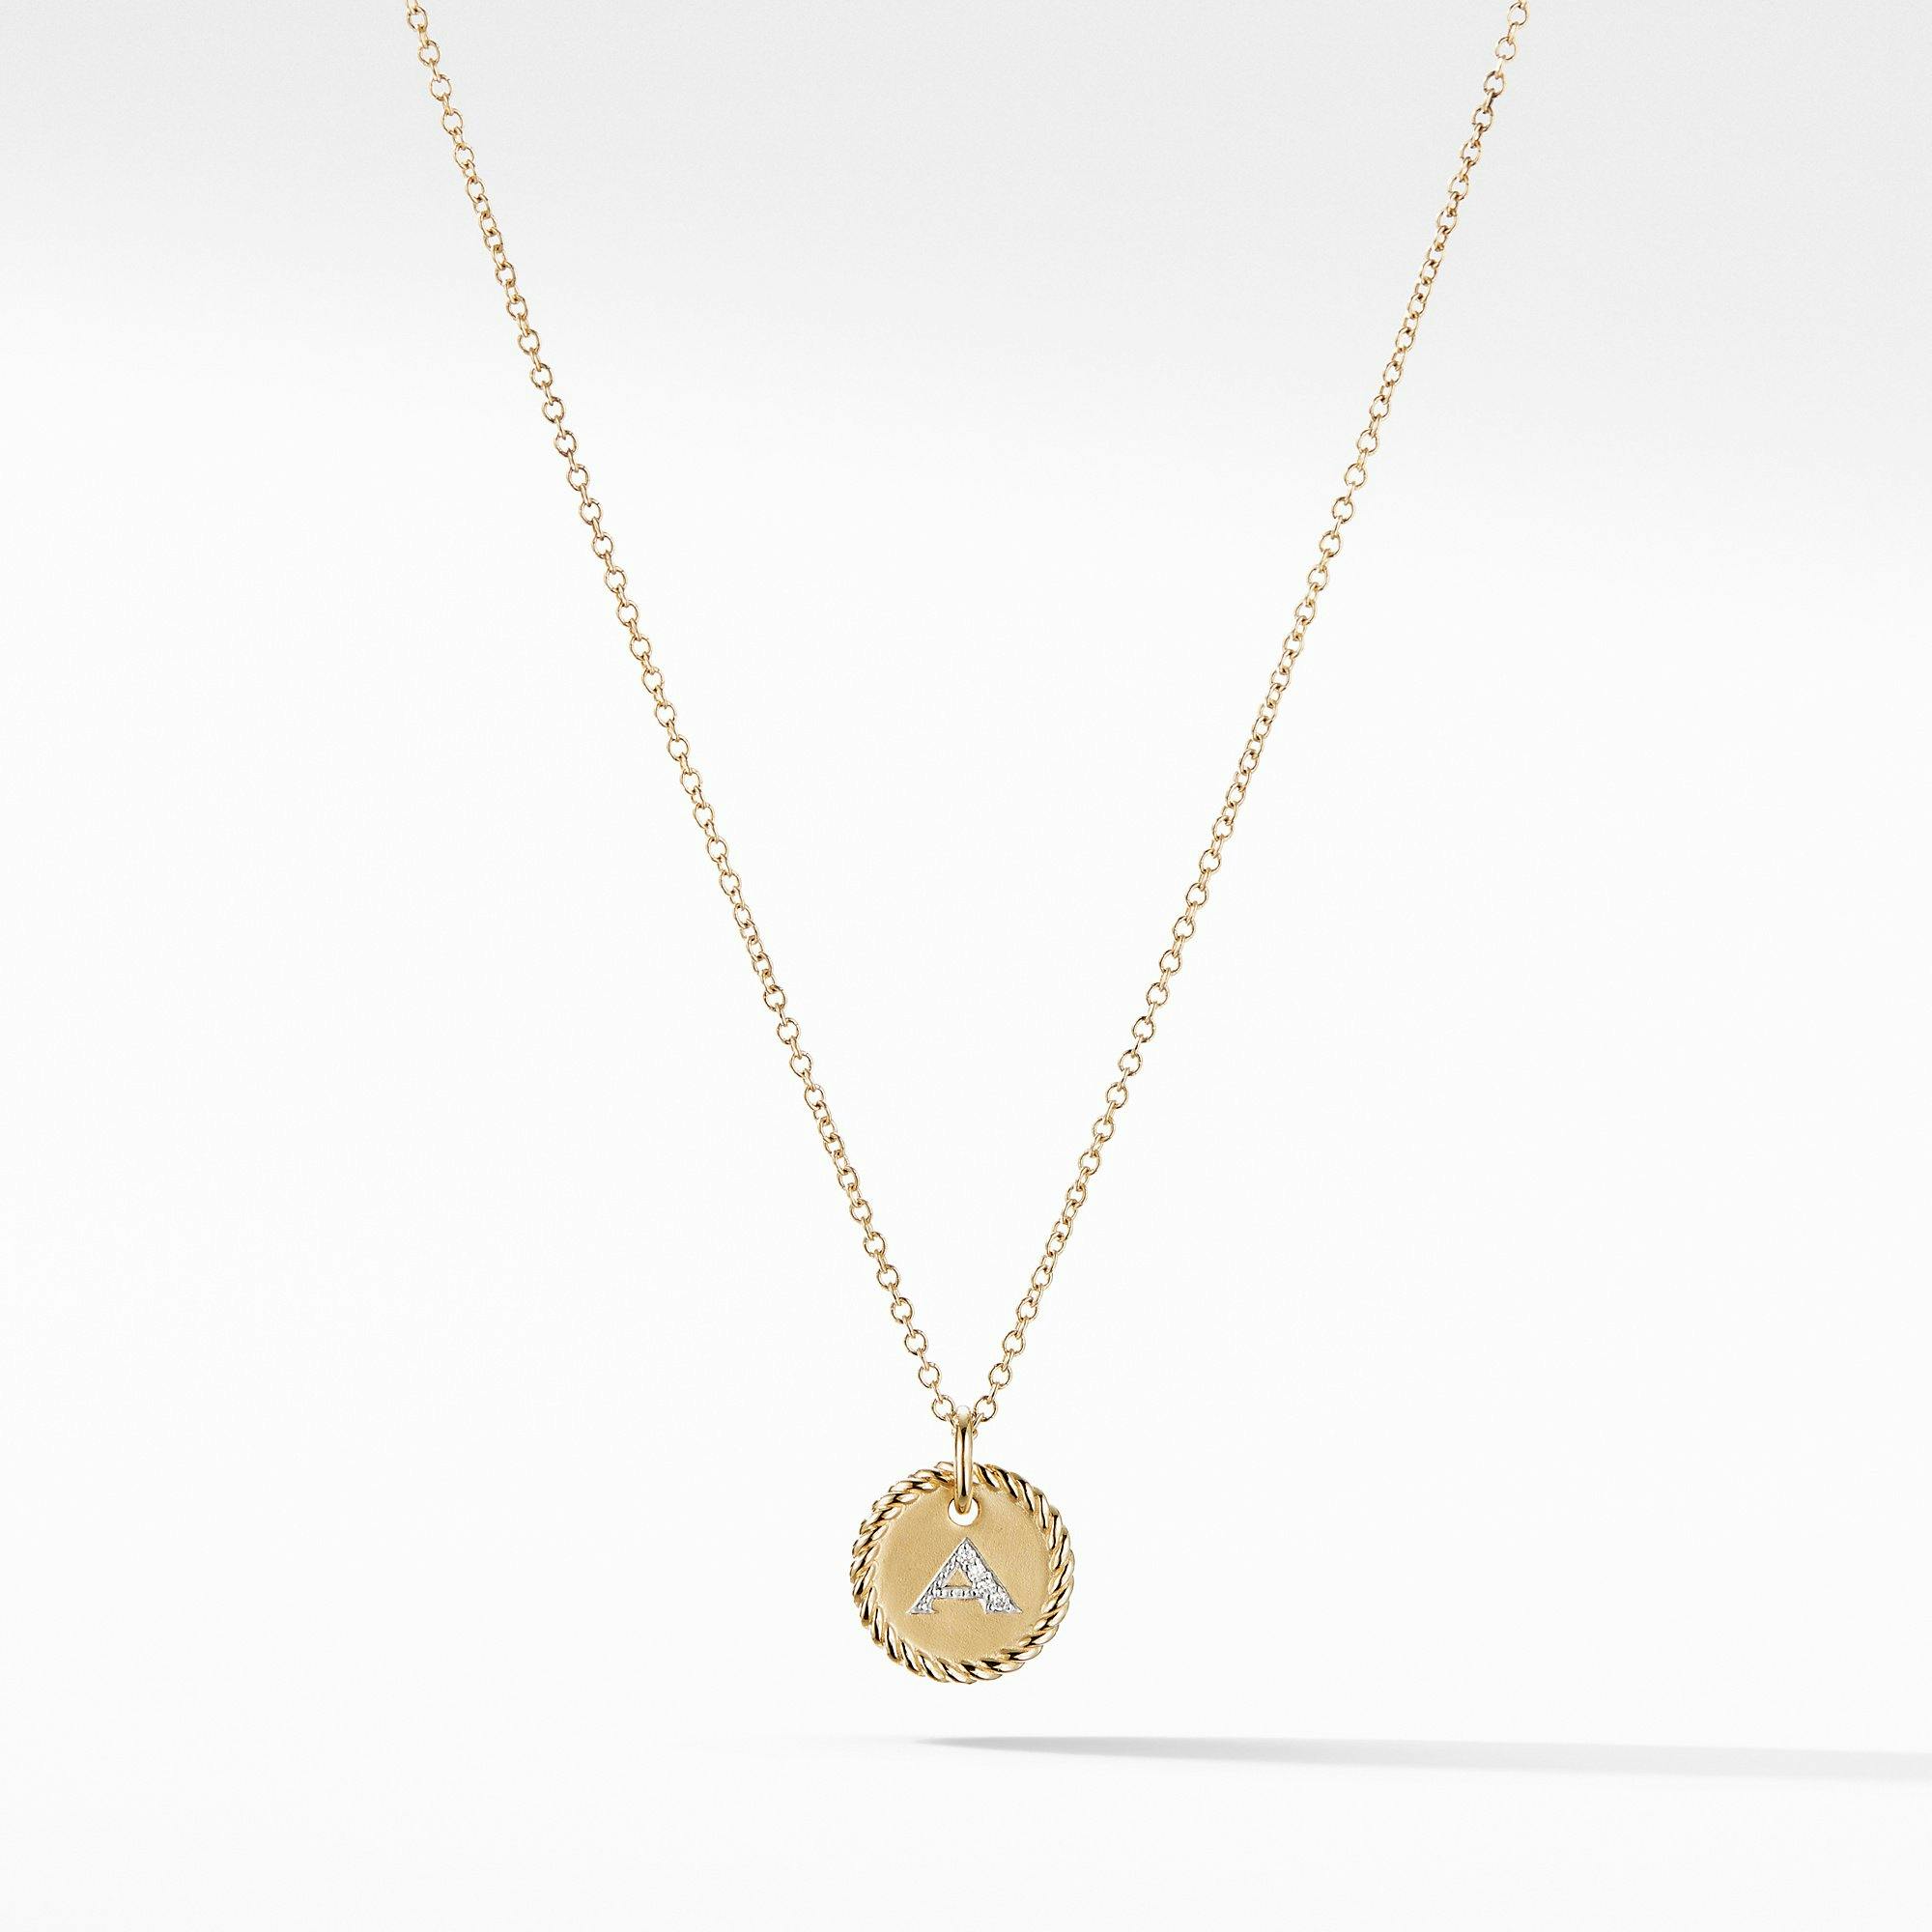 David Yurman "A" Initial Charm Necklace in 18k Yellow Gold with Diamonds